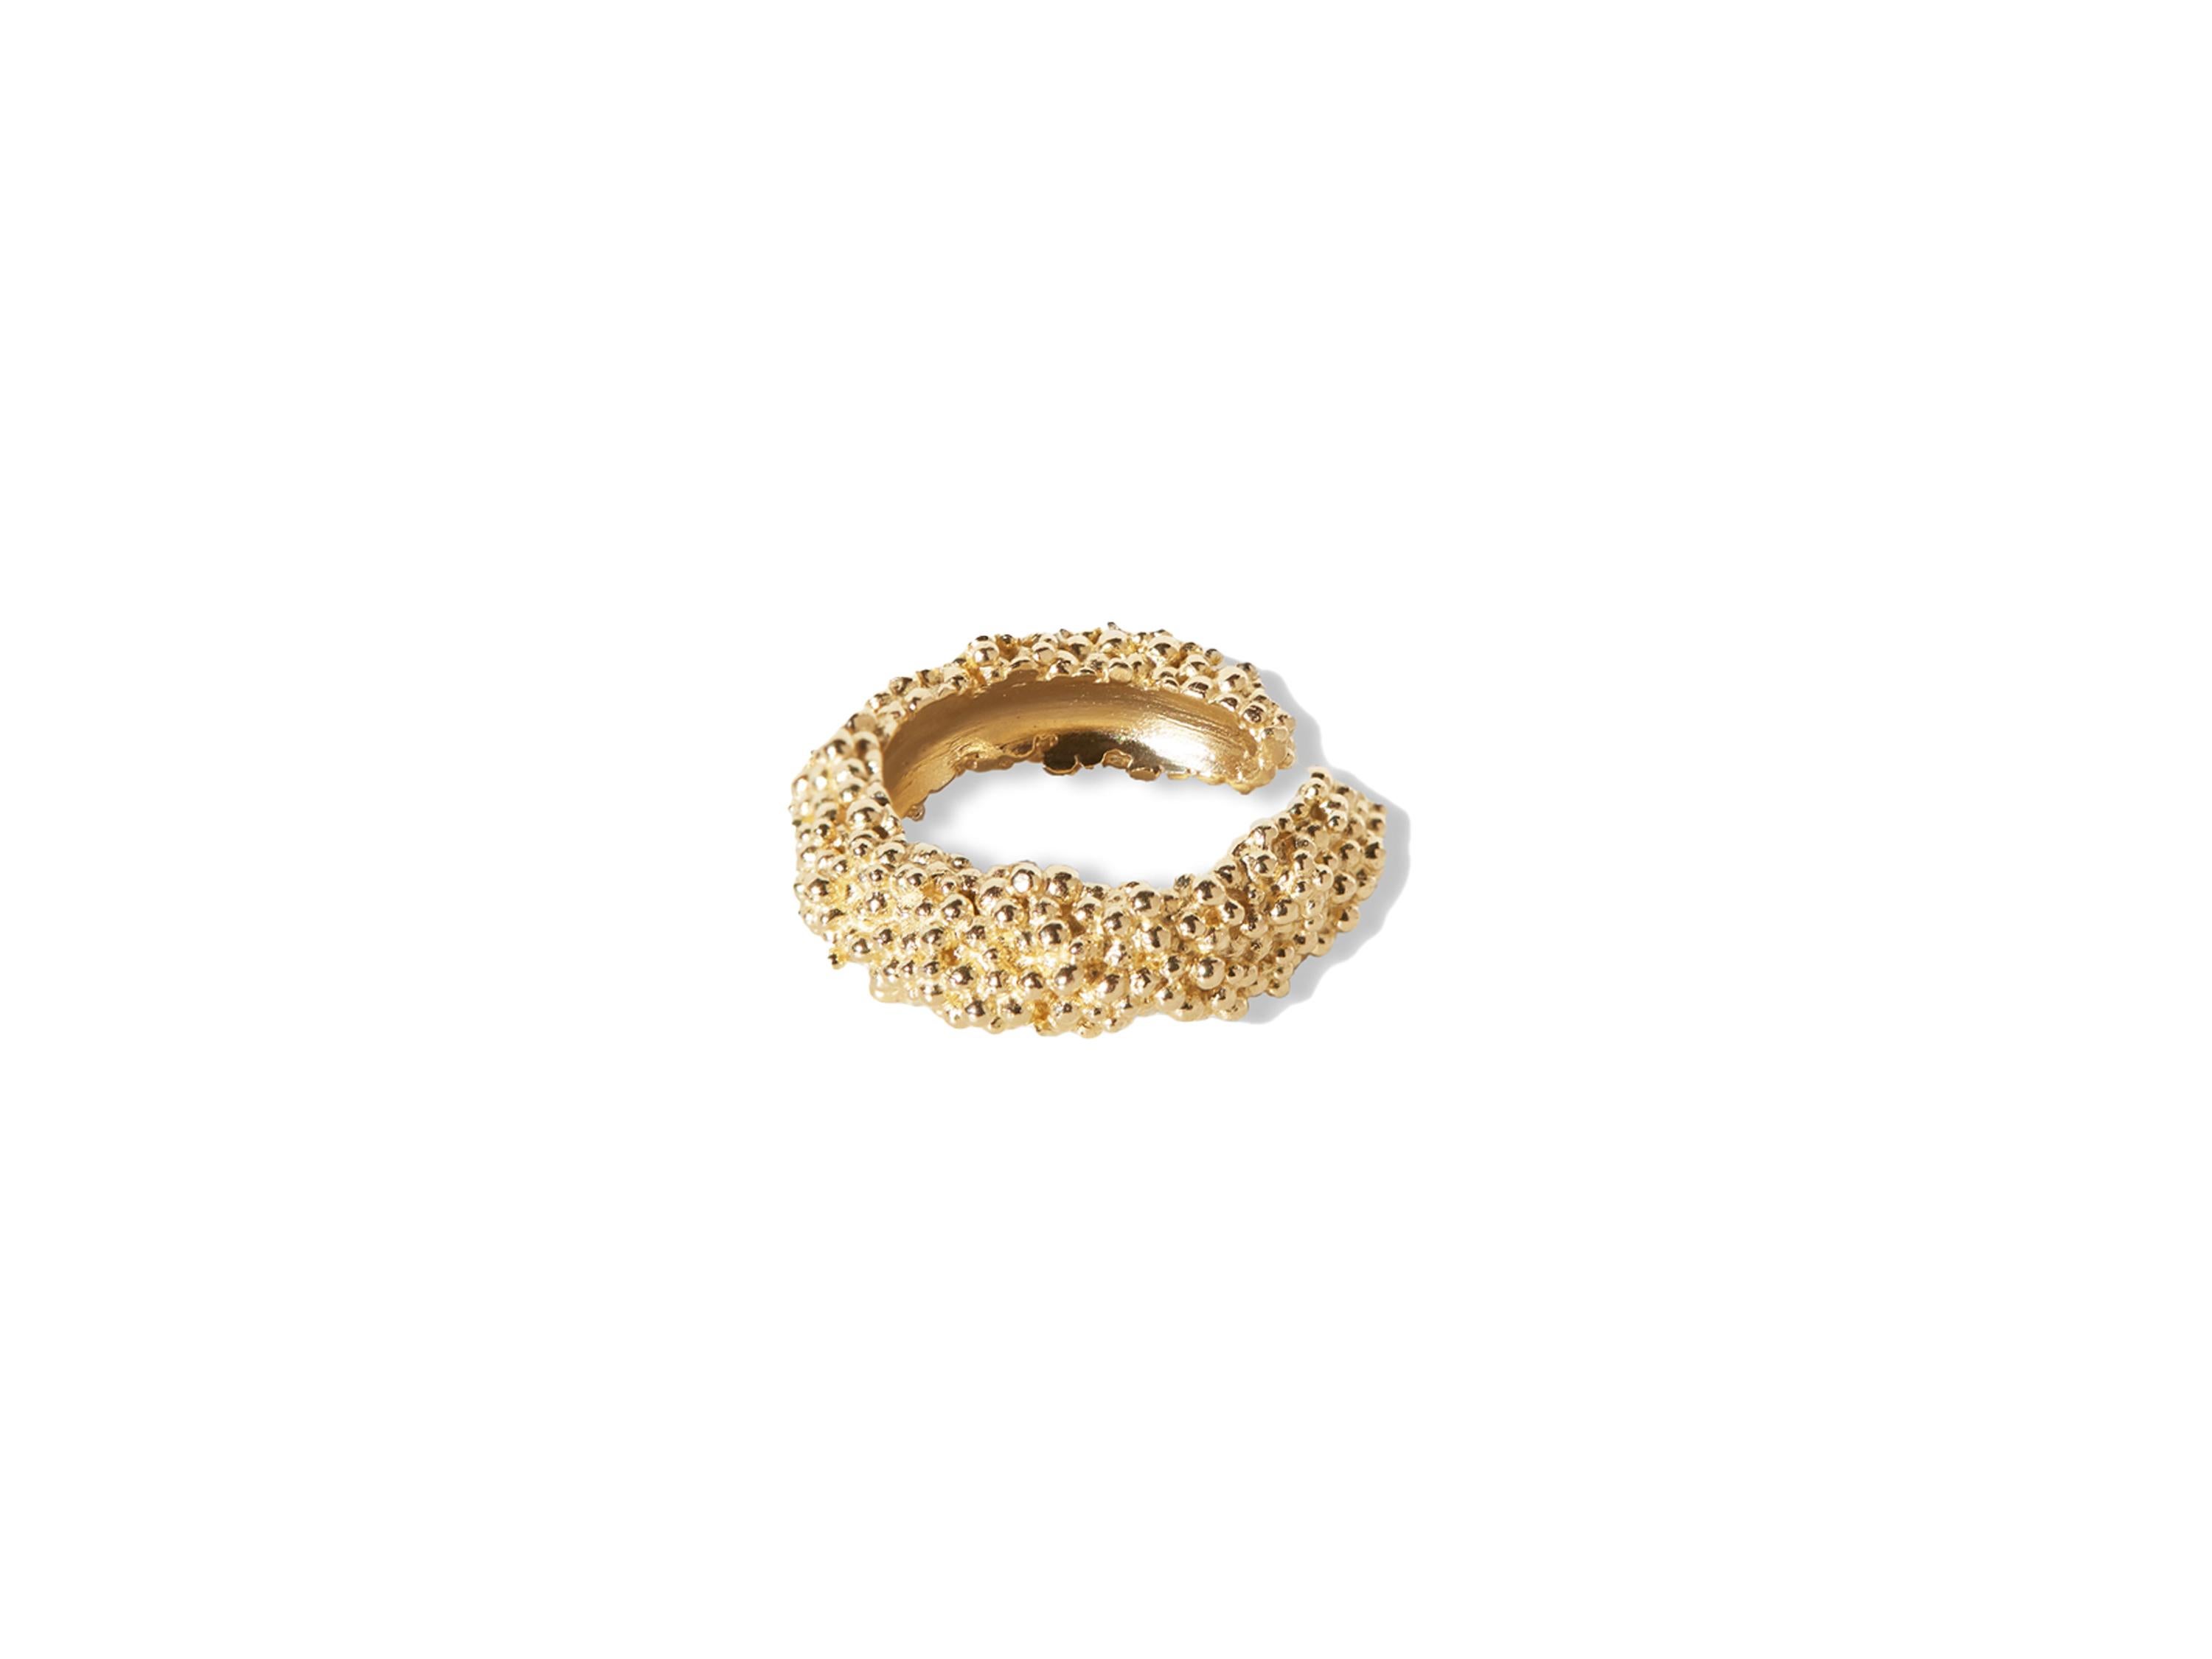 14 Karat Recycled Yellow Gold Grano Ear Cuff by Mon Pilar

Ear cuff composed of tiny granules of gold. Inspired by ancient Etruscan granulation, our modern adaptation is comfortable and easy to wear. No piercing required.

Sold as a single